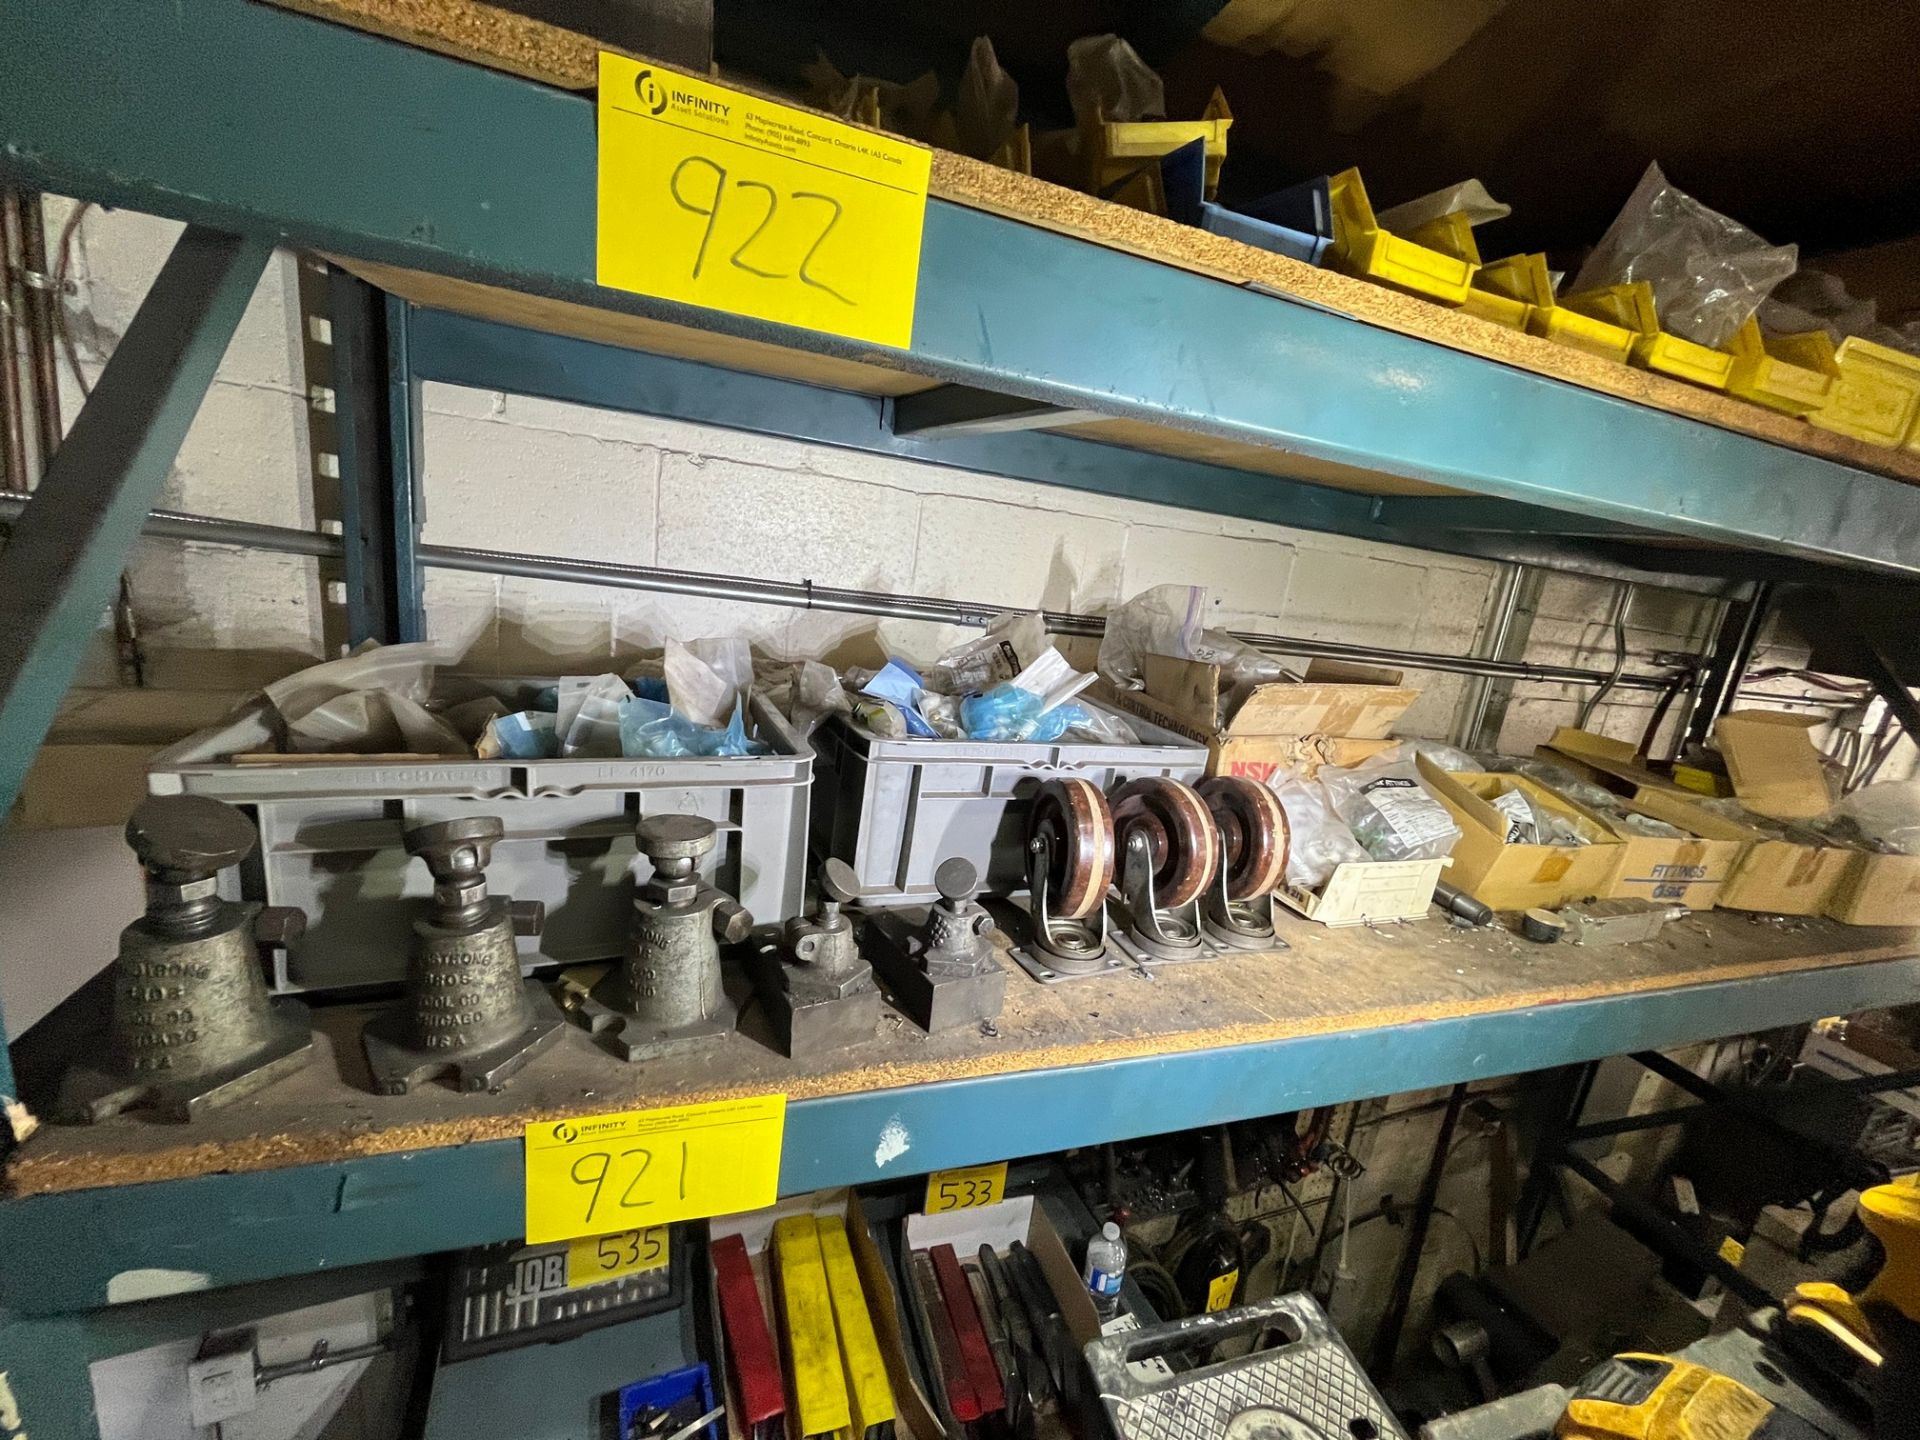 CONTENTS OF (1) SHELF OF PALLET RACKING INCLUDING FITTINGS, CASTORS, LEVELERS, ETC. - Image 2 of 5